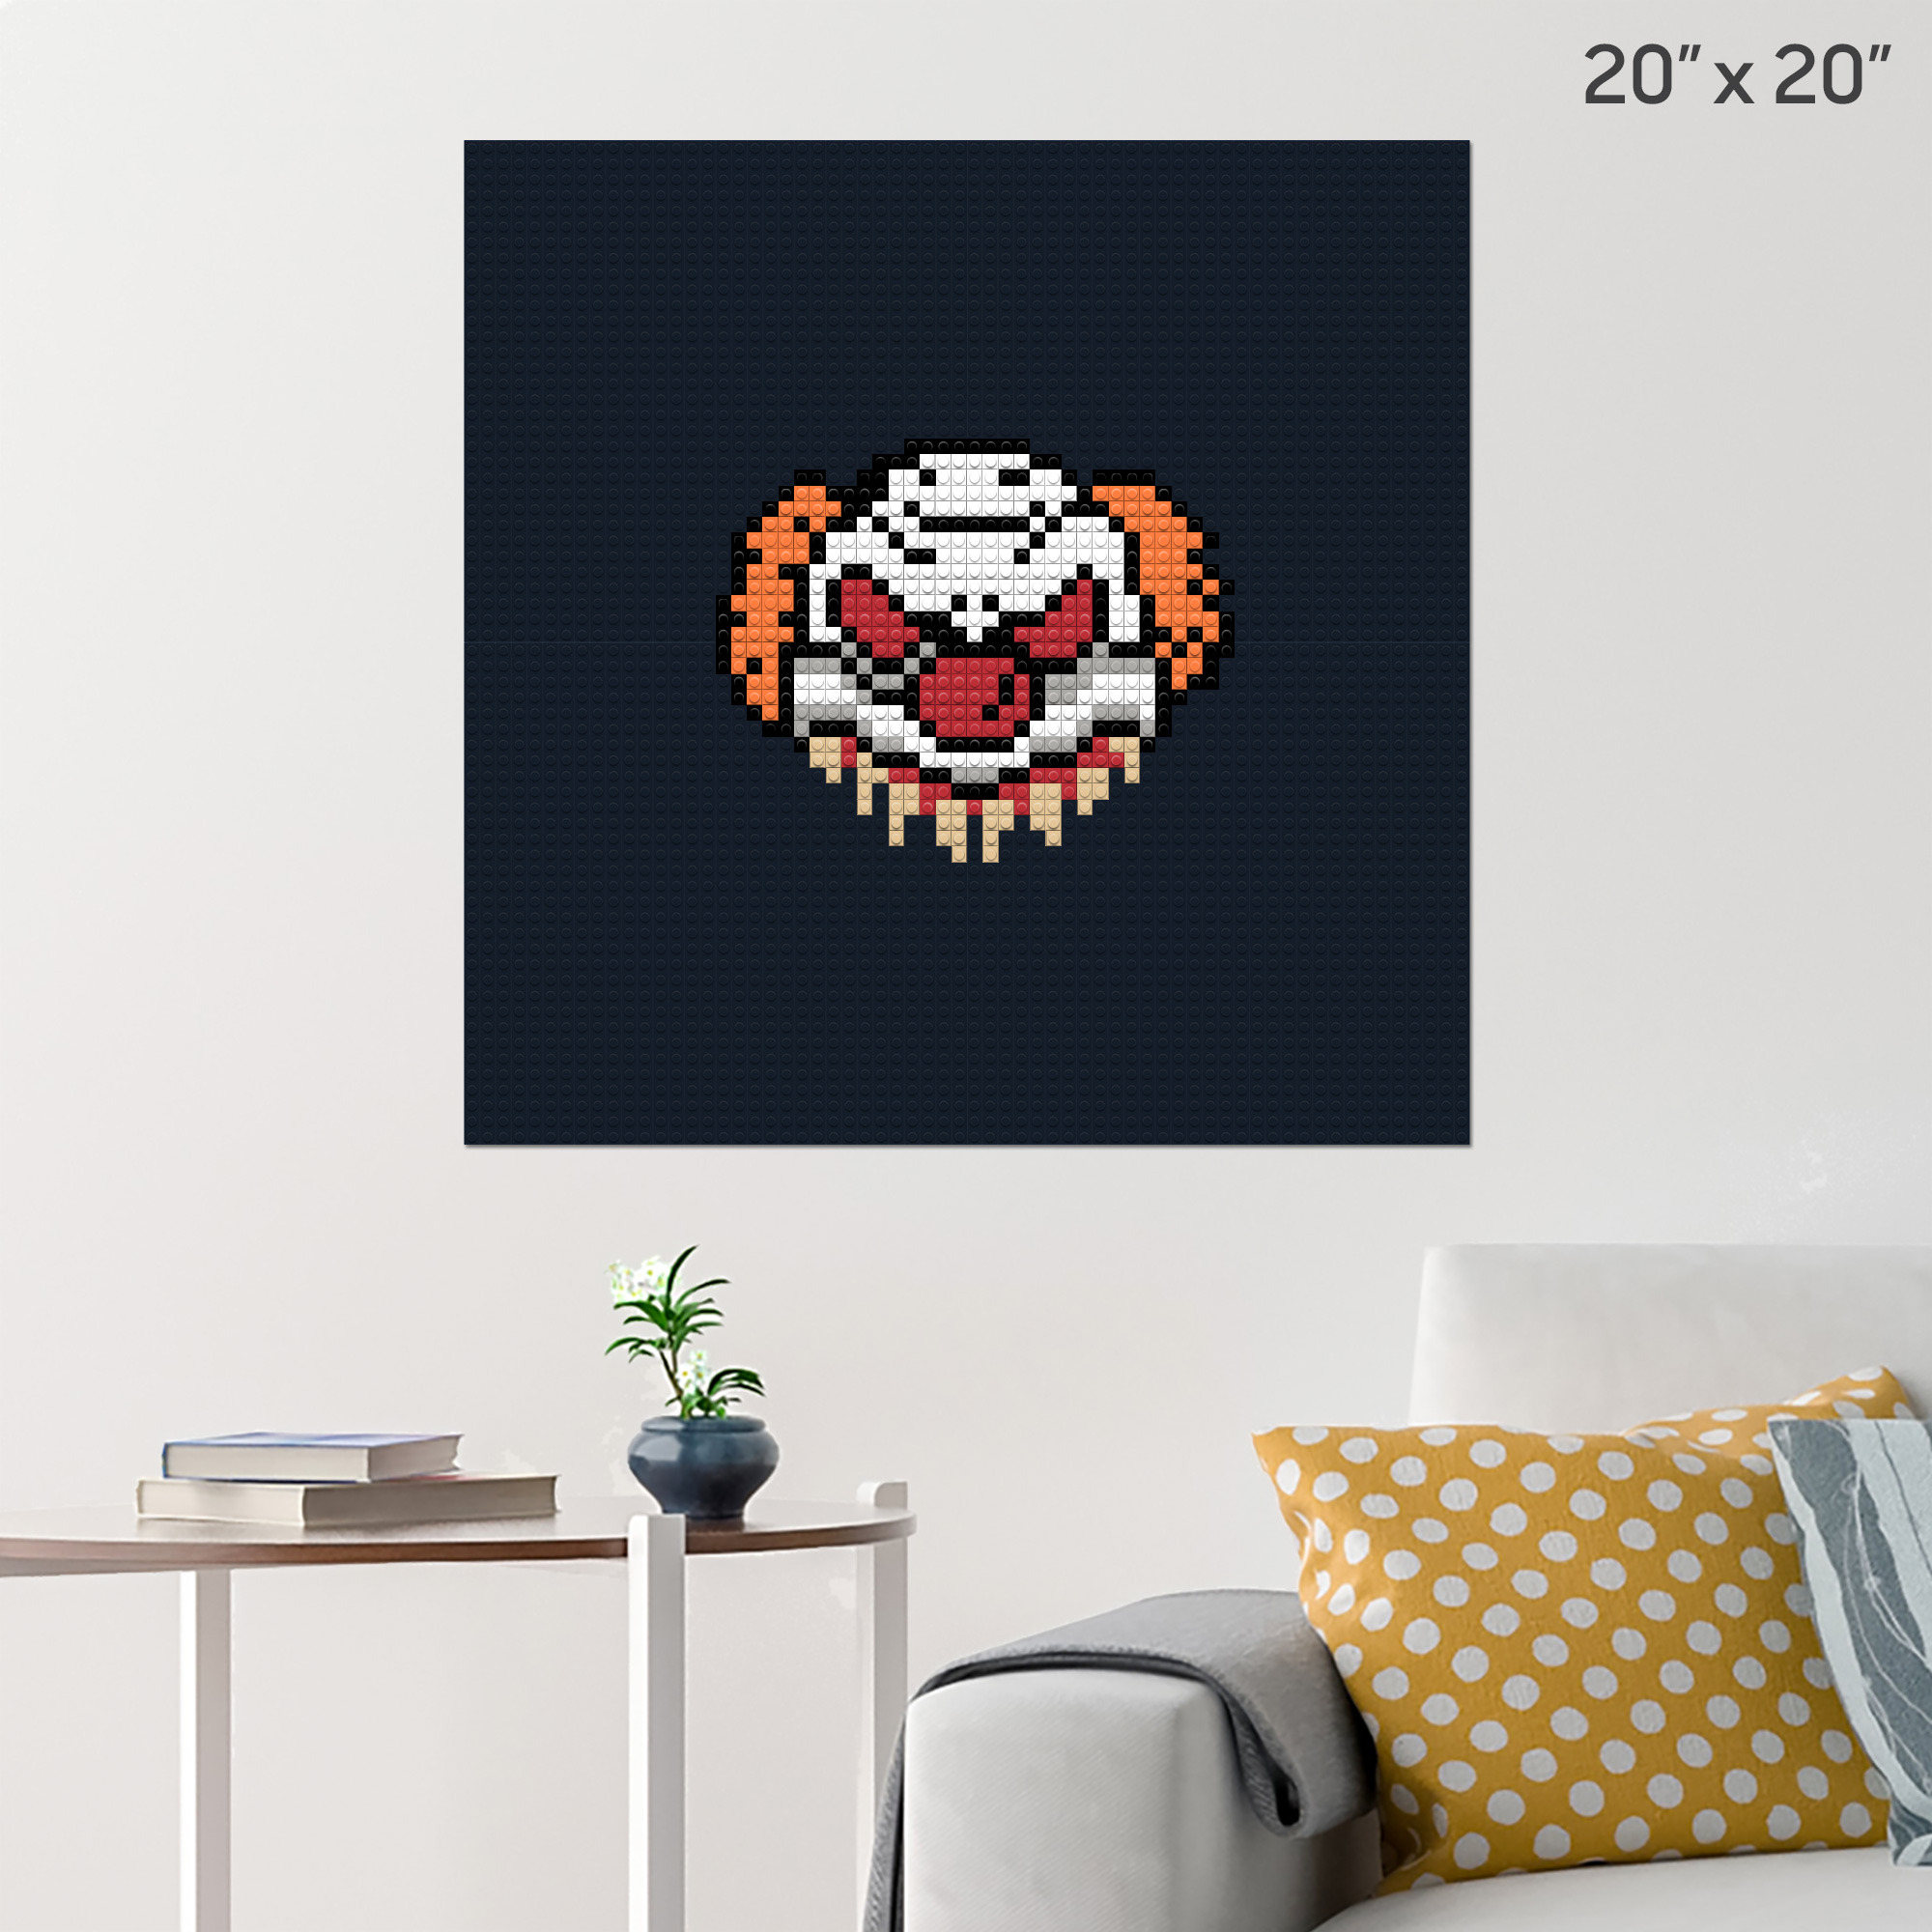 It Pennywise Wall Decal 25x21 